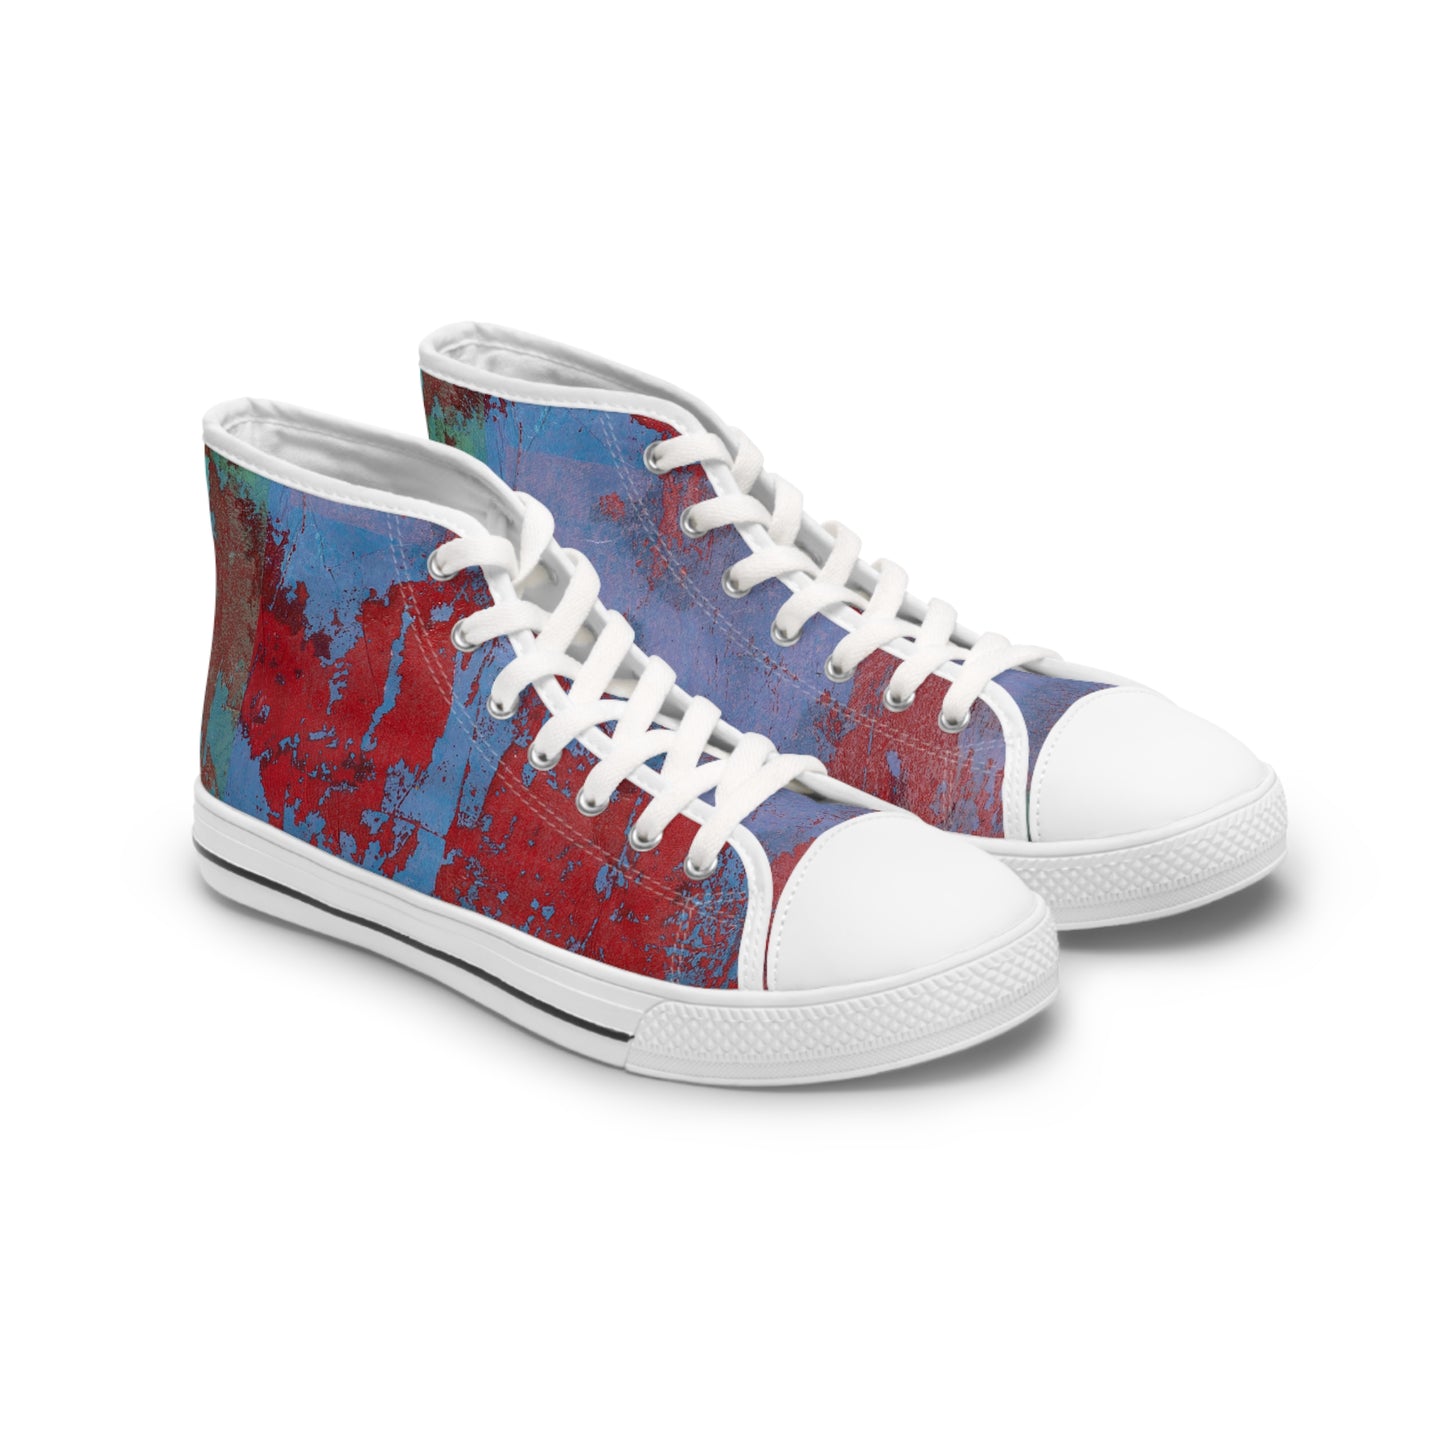 Women's High Top Sneakers - 02857 US 12 White sole